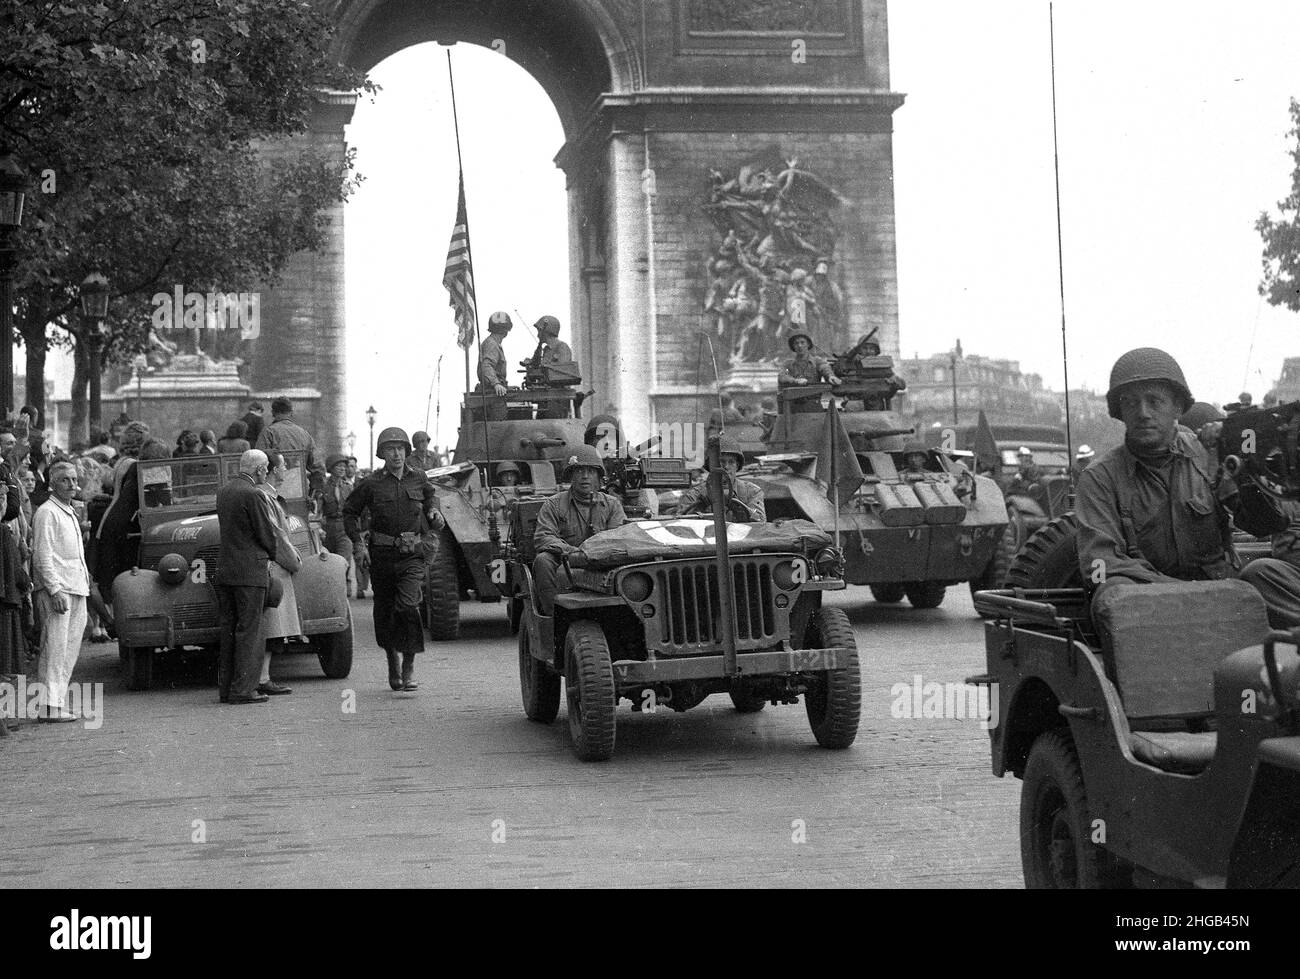 France World War Two. American soldiers of the 2nd armoured division driving through the Arc de Triomphe on the Champs-Elysees during the liberation of Paris France August 1944. LARGER FILES AVAILABLE ON REQUEST Stock Photo